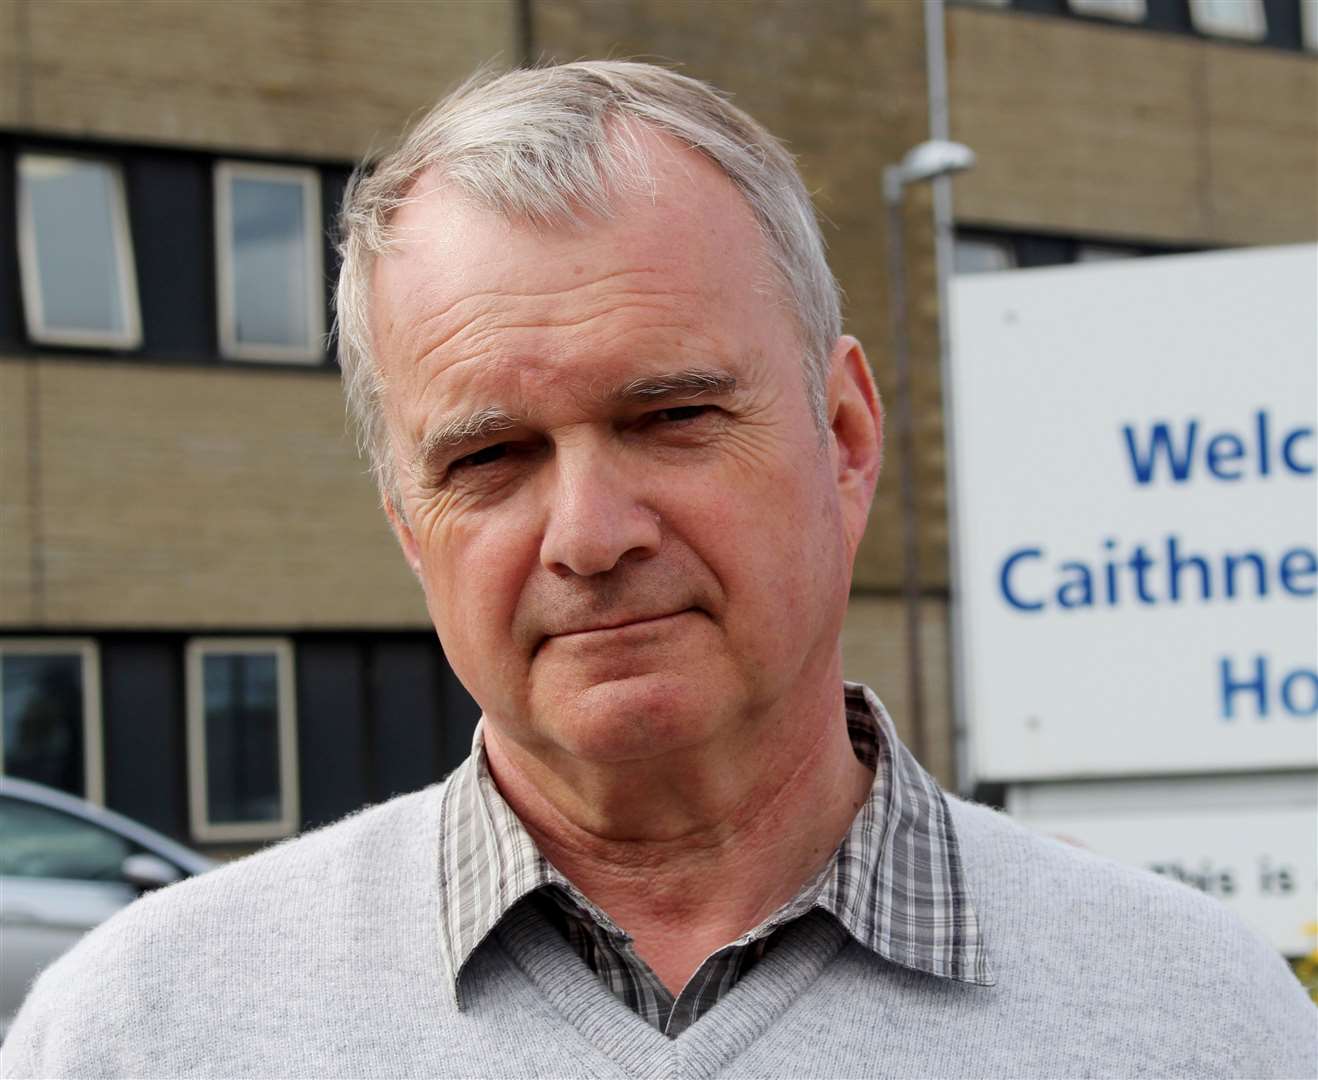 Ron Gunn has been campaigning to improve health services in Caithness. Picture: Alan Hendry